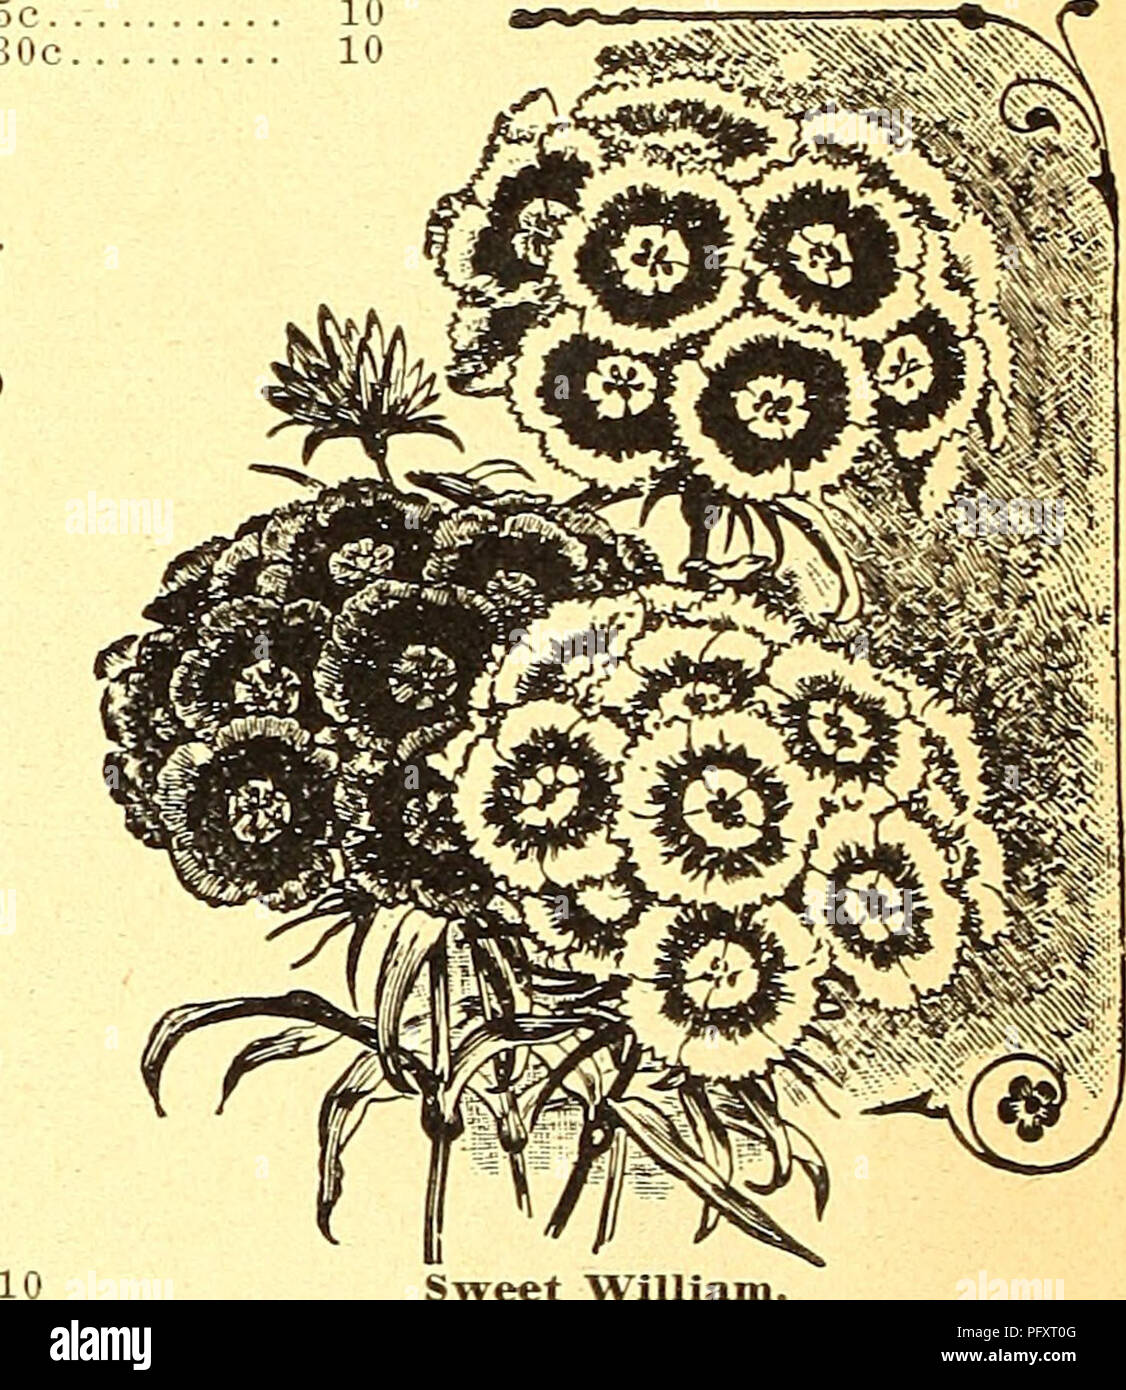 . Currie's farm and garden annual : spring 1925 50th year. Flowers Seeds Catalogs; Bulbs (Plants) Seeds Catalogs; Vegetables Seeds Catalogs; Nurseries (Horticulture) Catalogs; Plants, Ornamental Catalogs; Gardening Equipment and supplies Catalogs. (' SCABIOSA. Mourning Bride or S^Teet Scabiosus. Very desirable plants, producing very pretty flowers of many colors in great profusion. Good for cutting for vases, etc. H. A. Pkt. Dwarf DoubleâFlowers very double and globular. % oz. 25c 10 Leviatlxan MixedâLarge and beautiful double flowers; tall growing. % oz. 25c. 10 PERE&gt;]MAL SCABIOUiS. Caucas Stock Photo